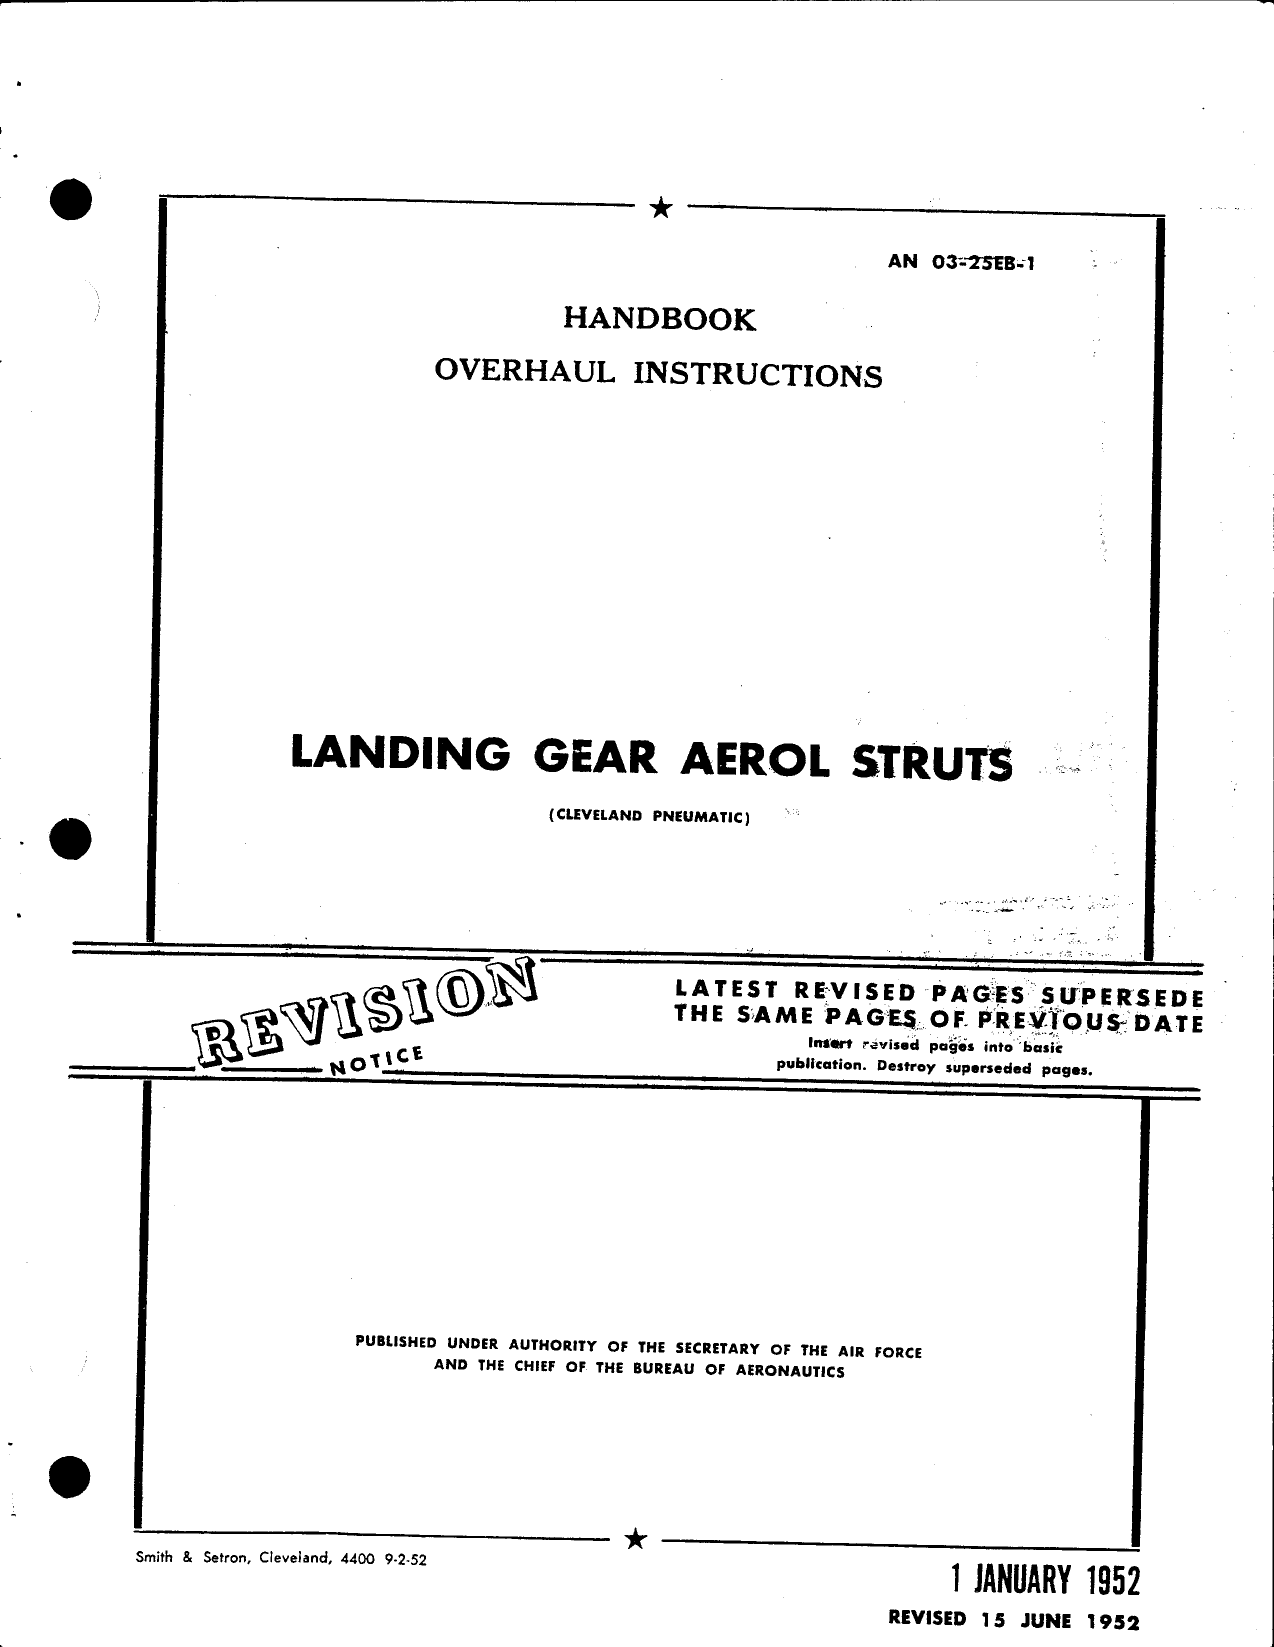 Sample page 1 from AirCorps Library document: Handbook Overhaul Instructions for Landing Gear Aerol Struts